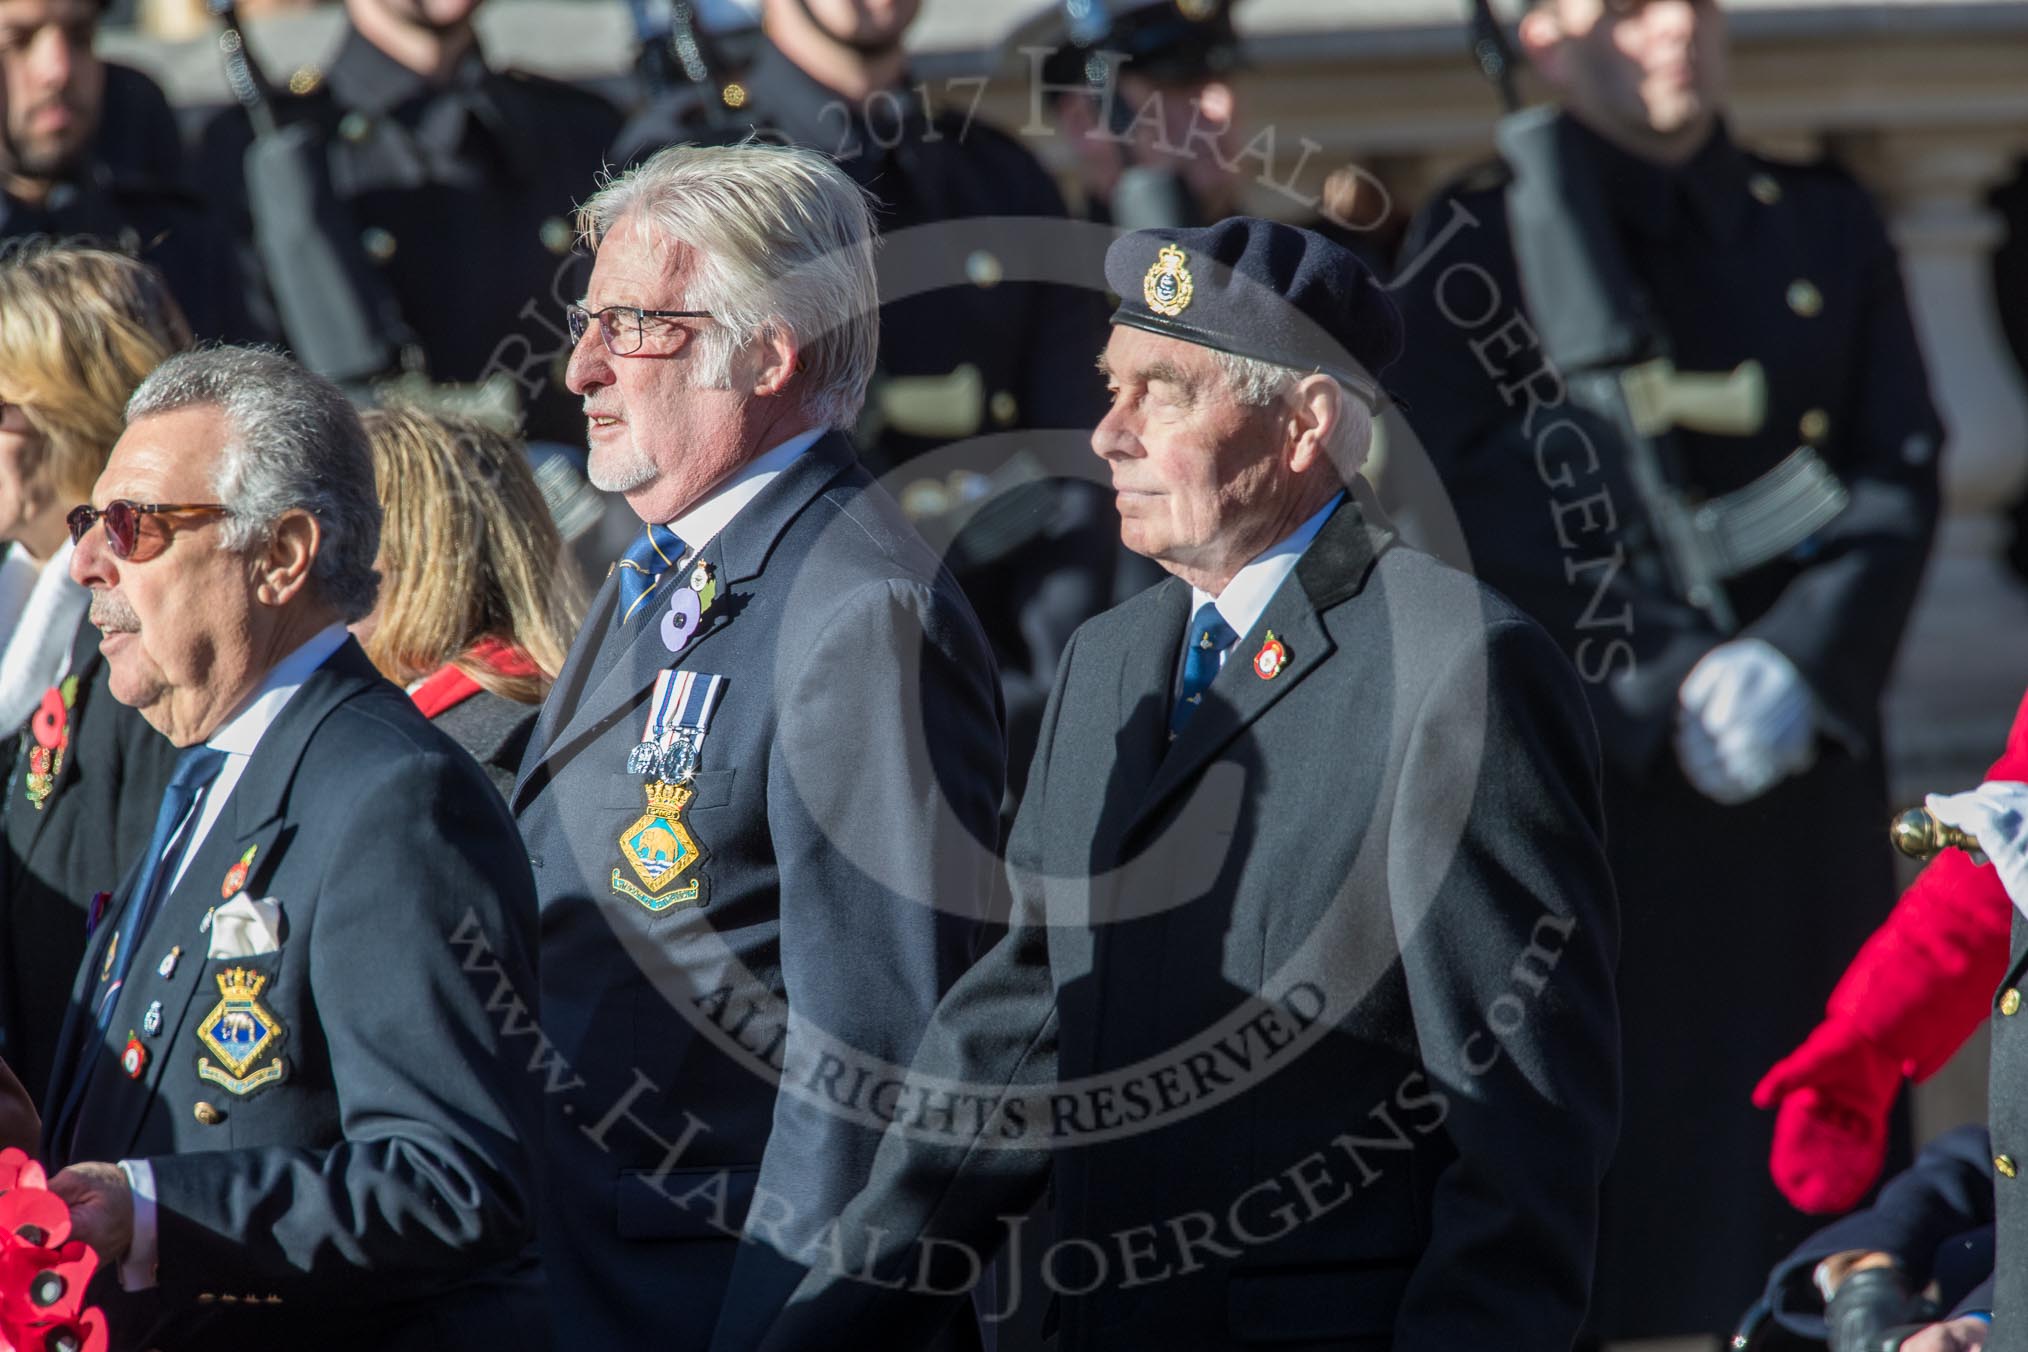 HMS Ganges Association  (Group E20, 30 members) during the Royal British Legion March Past on Remembrance Sunday at the Cenotaph, Whitehall, Westminster, London, 11 November 2018, 11:44.